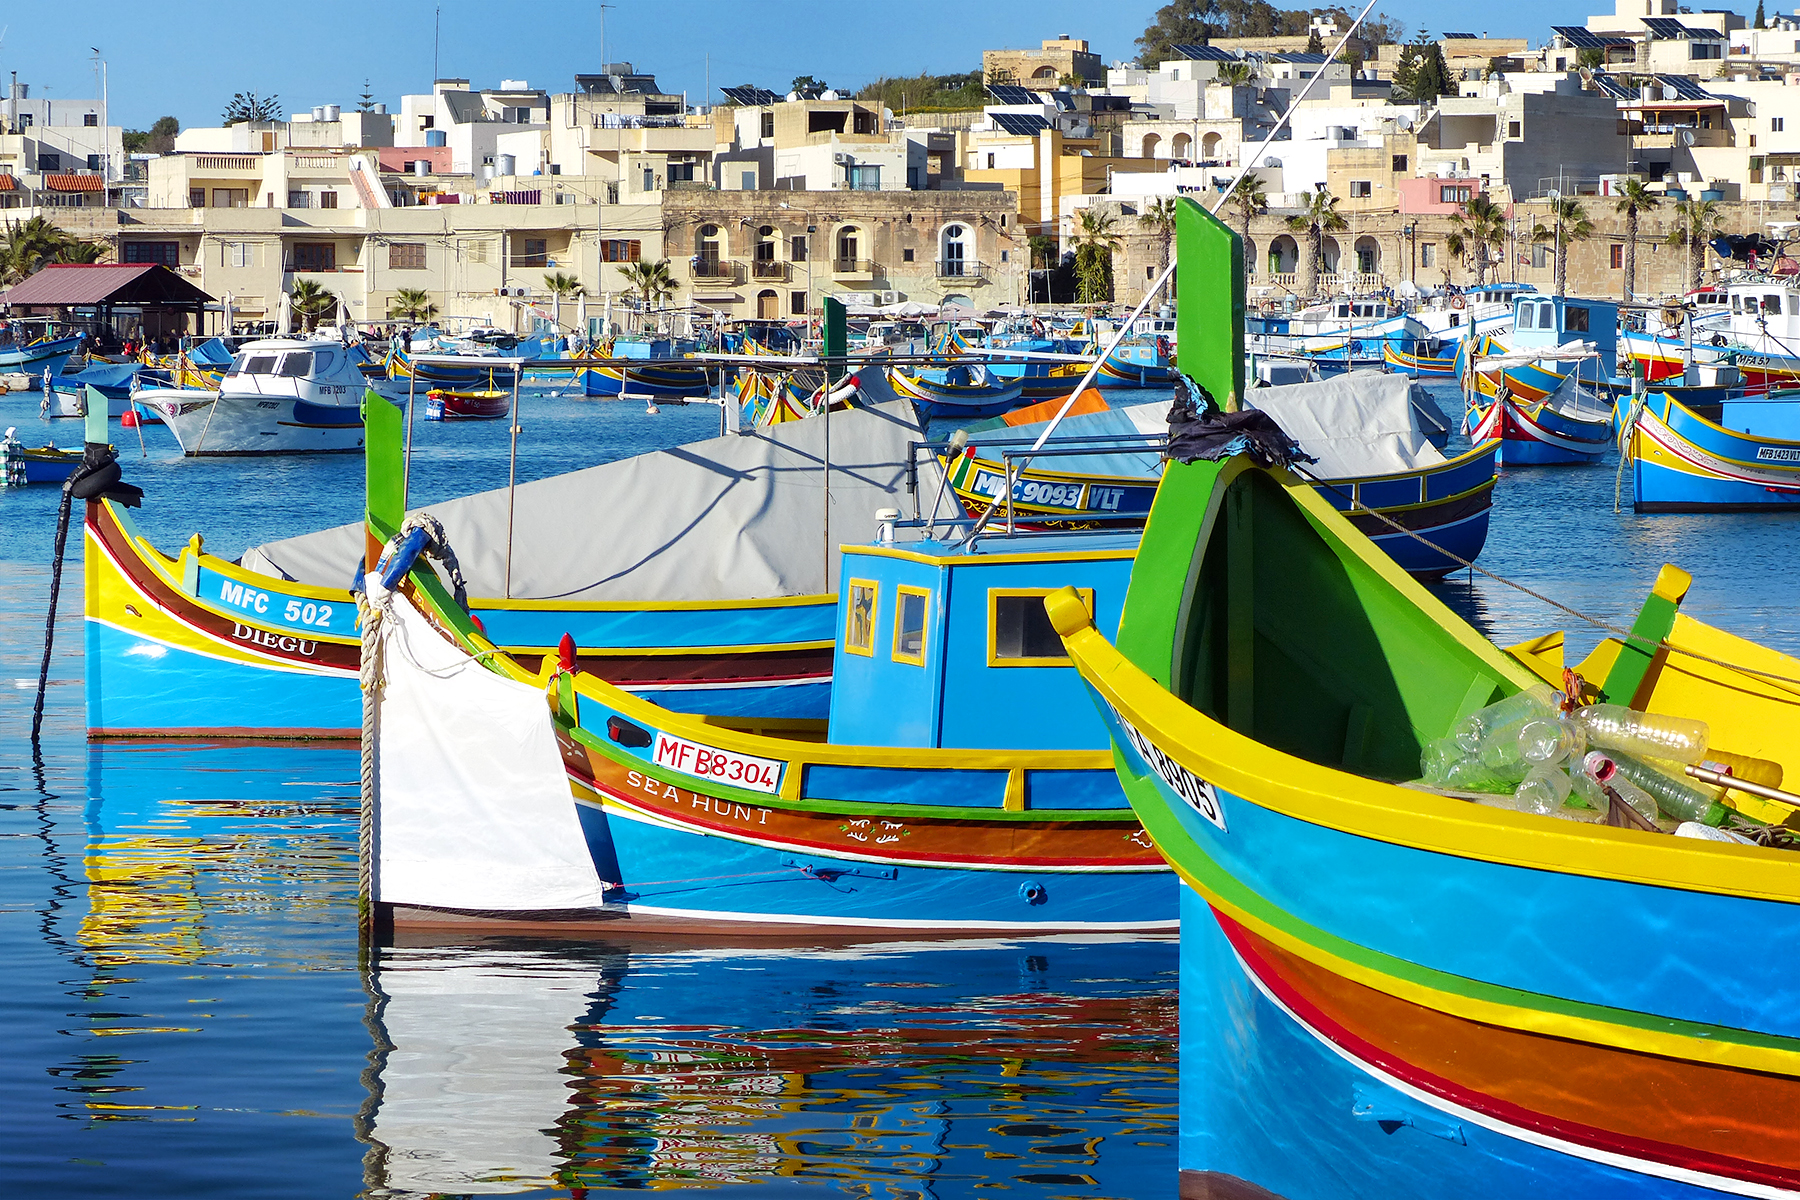 Malta: A Citadel of Many Cultures in the Middle of the Mediterranean